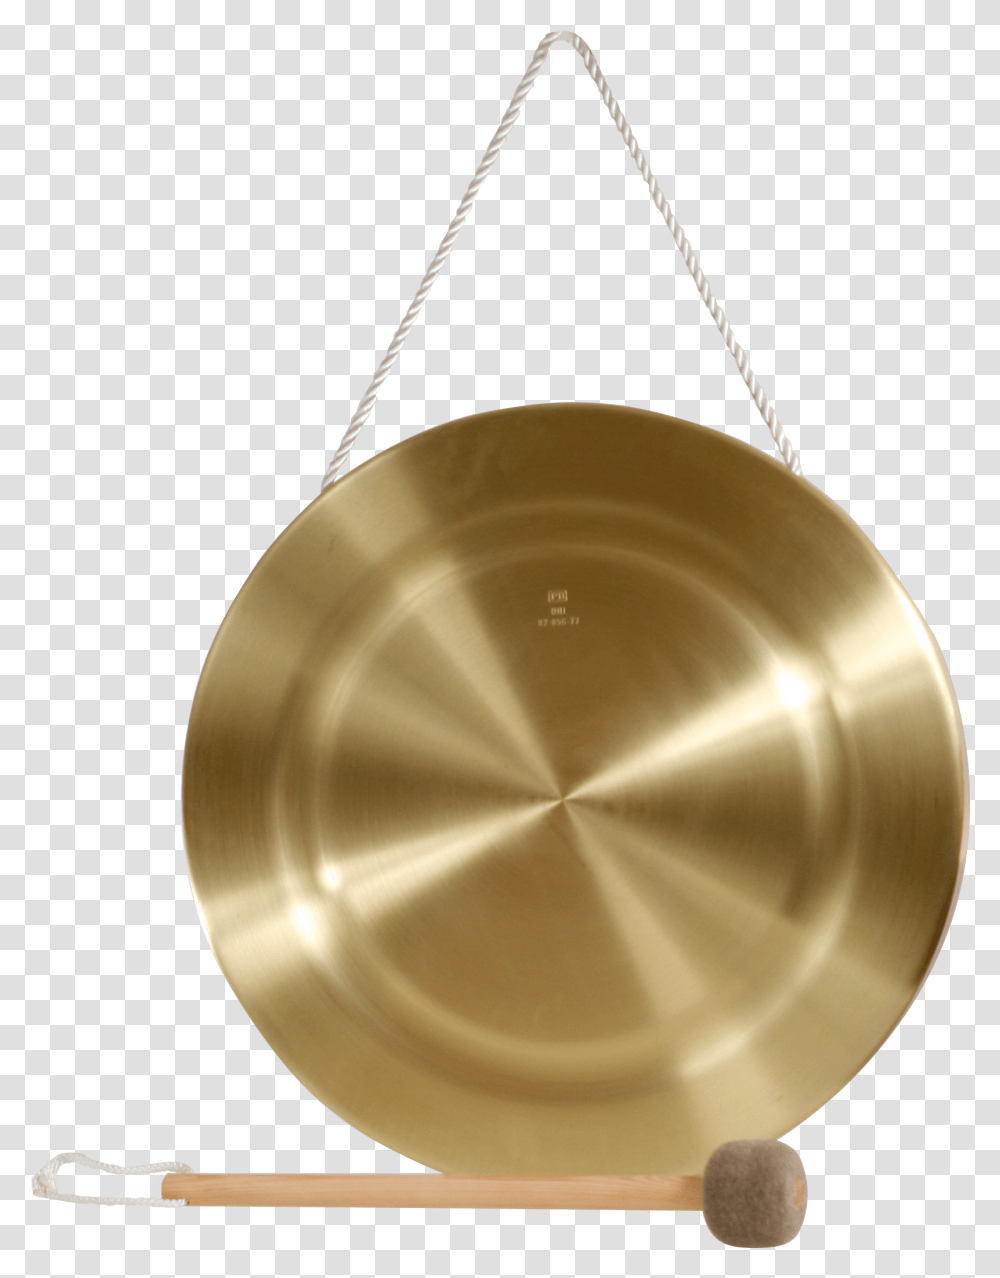 Music Instrument Tic Tac Toe, Lamp, Gong, Musical Instrument Transparent Png